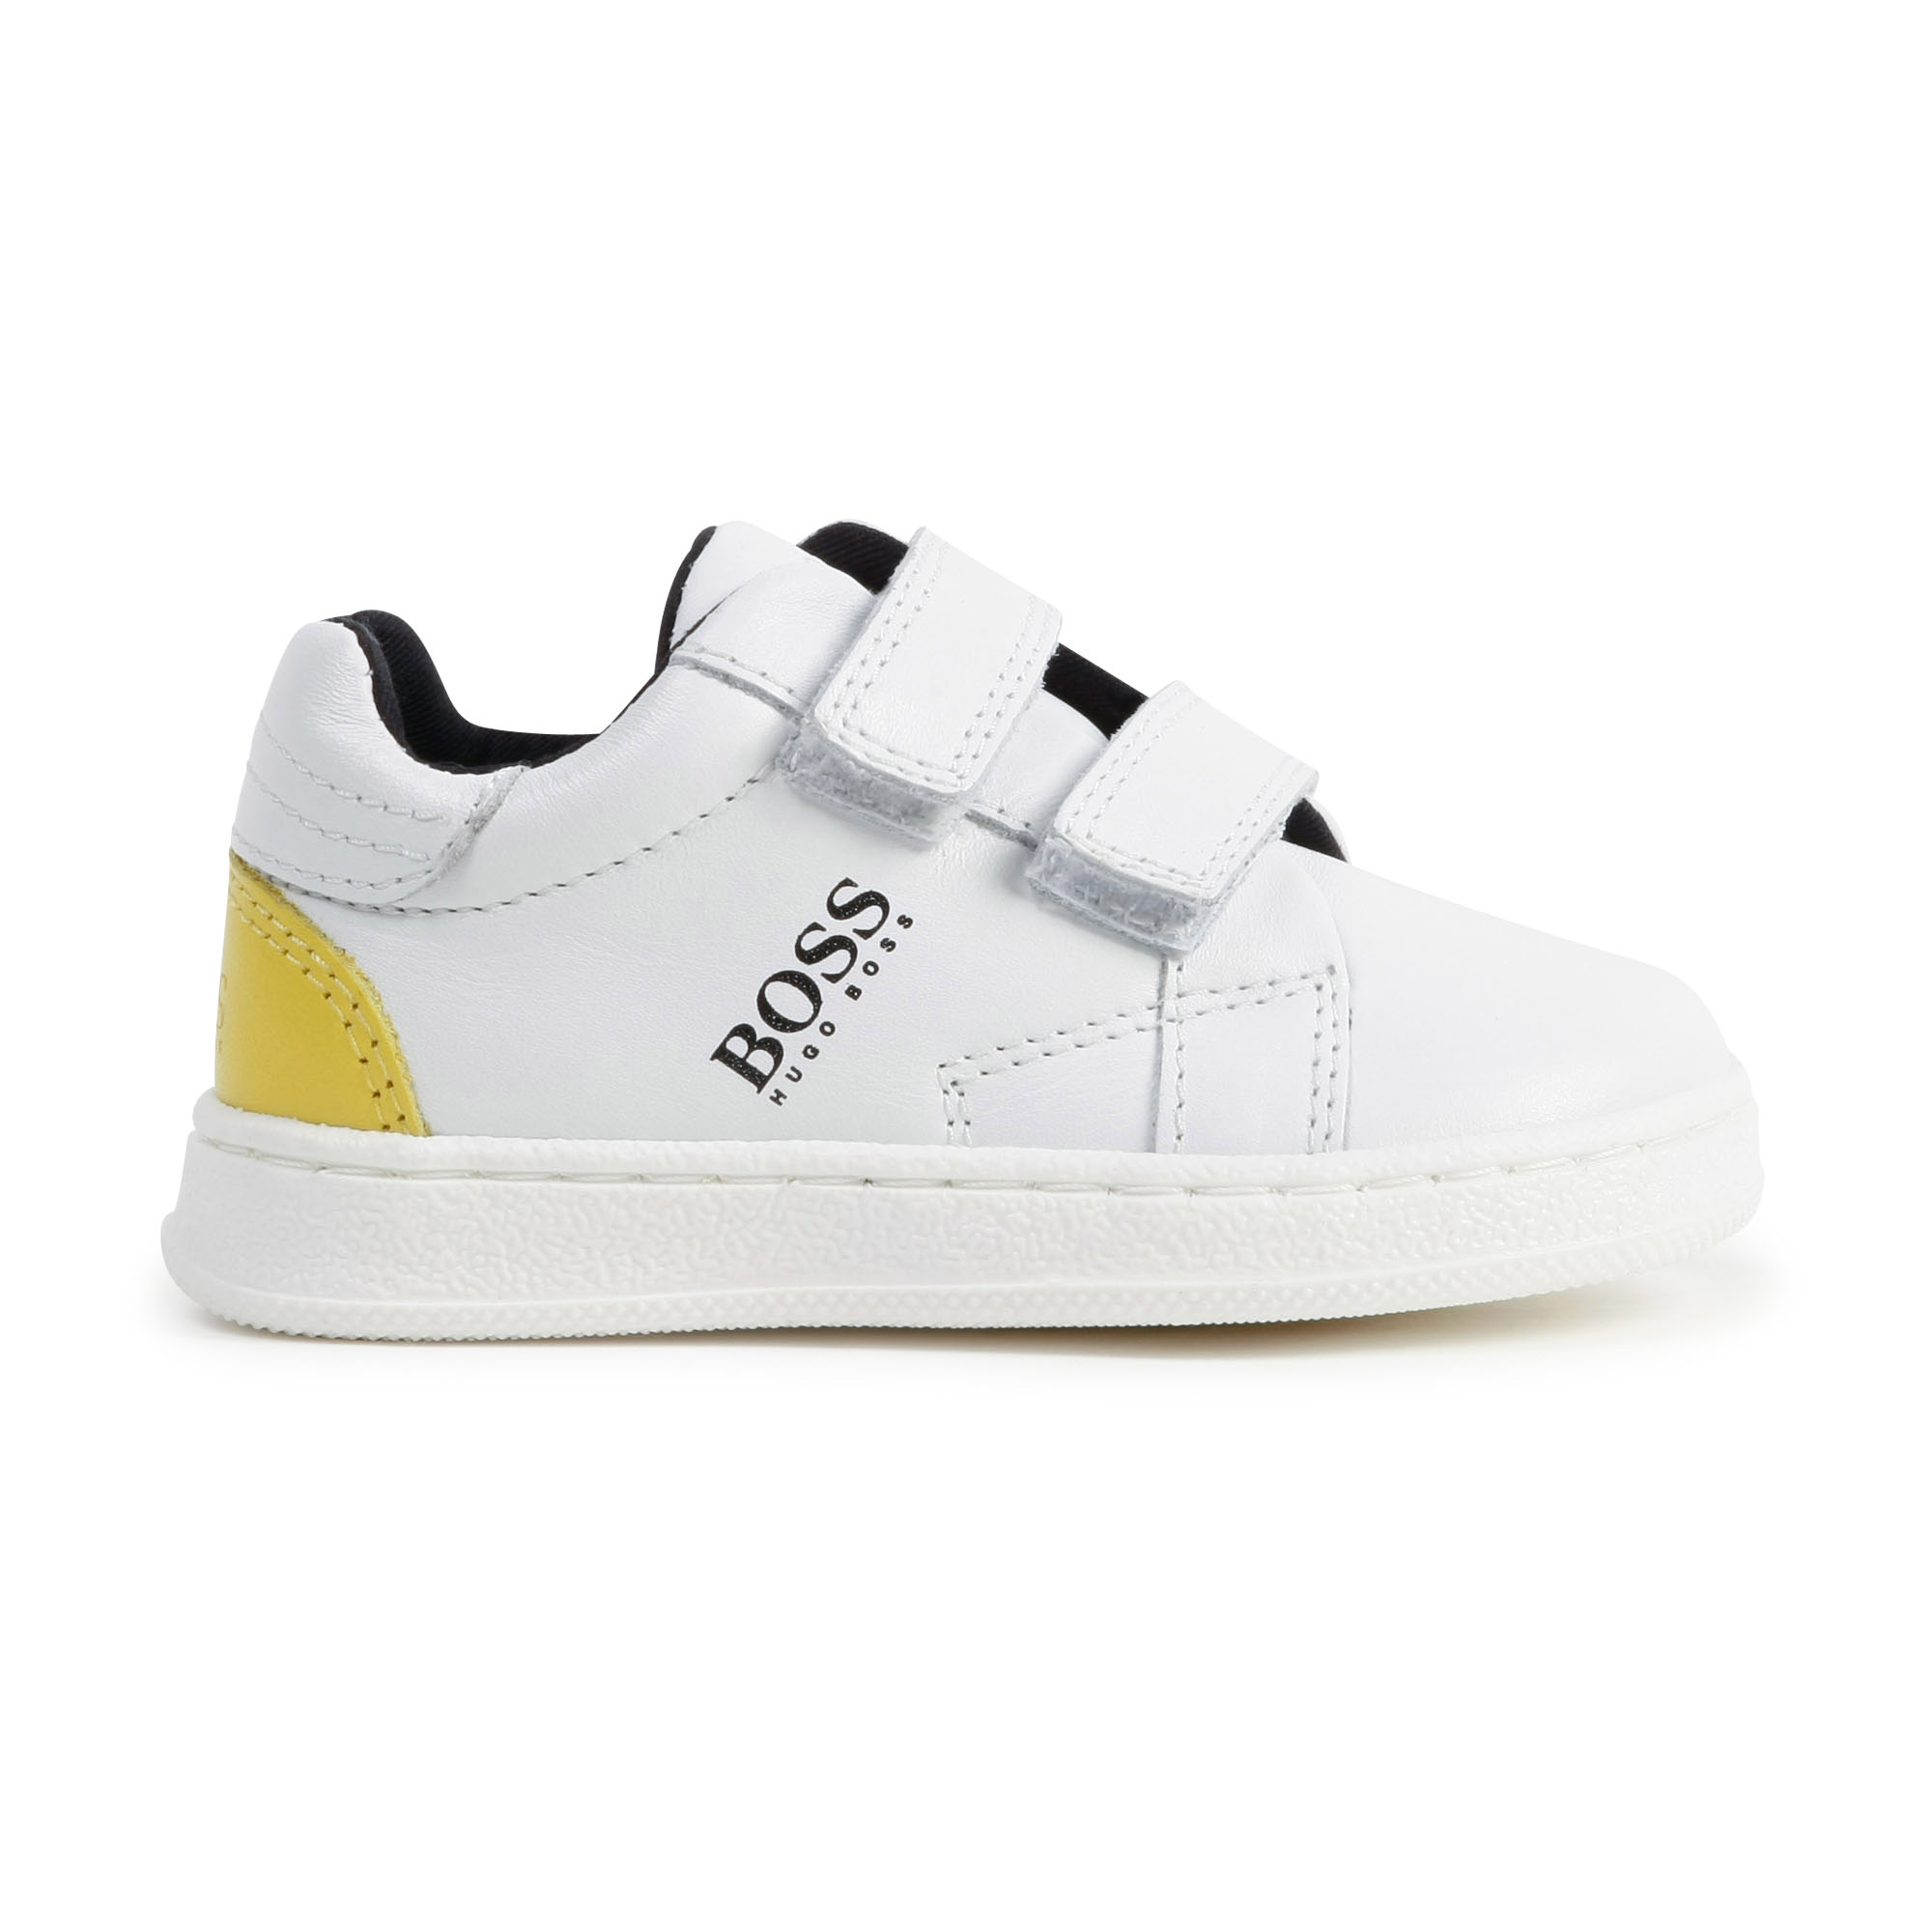 Hook-and-loop leather sneakers BOSS for BOY